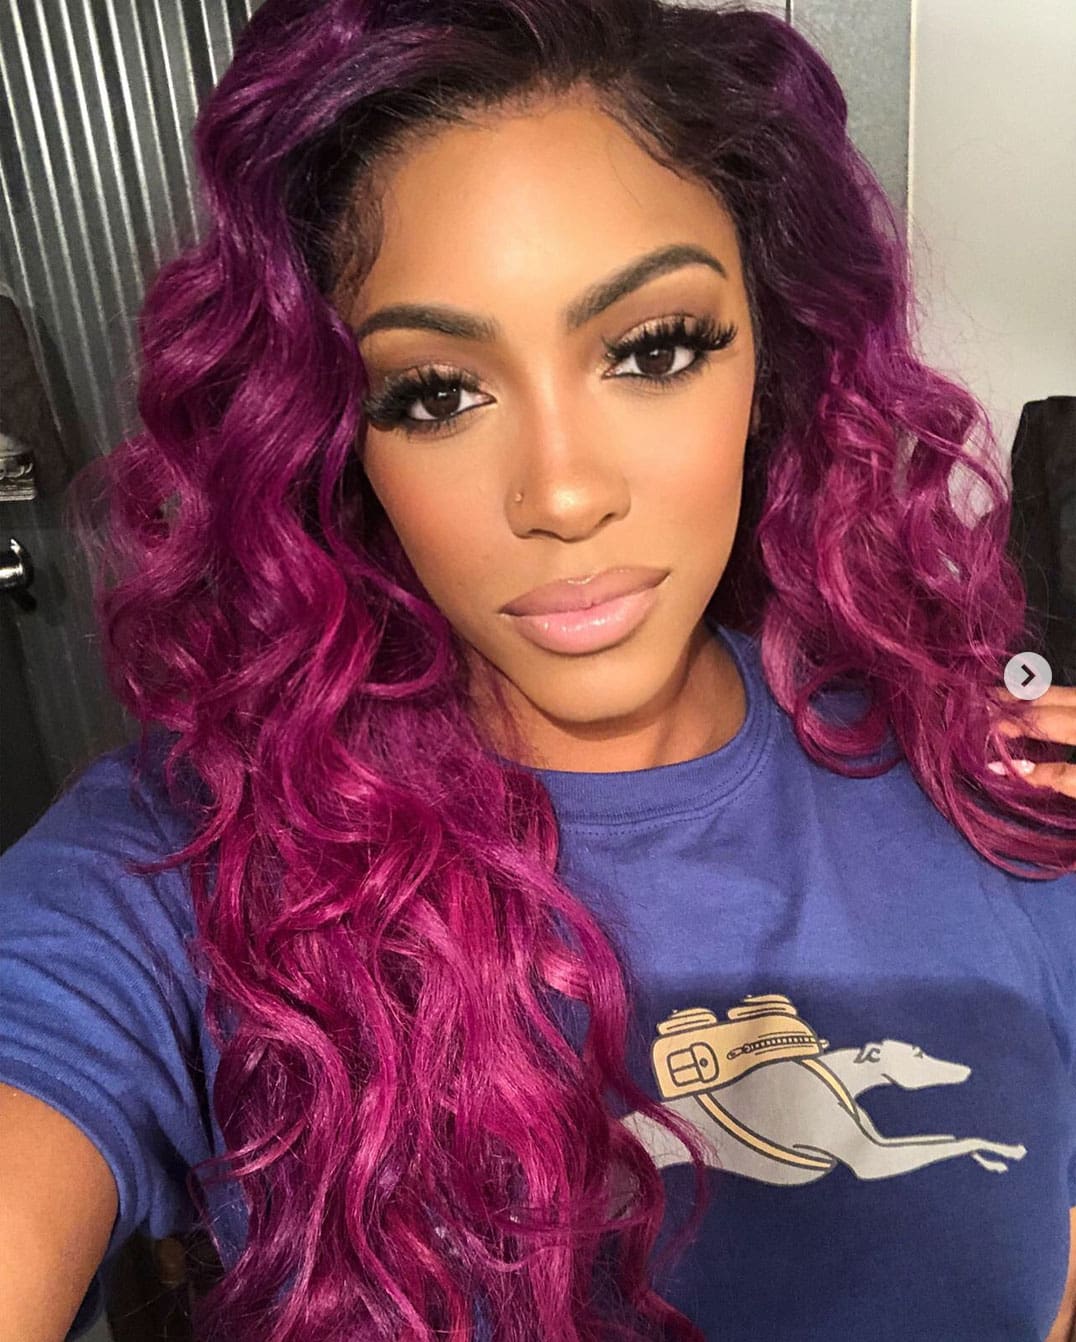 Porsha Williams' Latest Photo Has Fans Laughing In The Comments